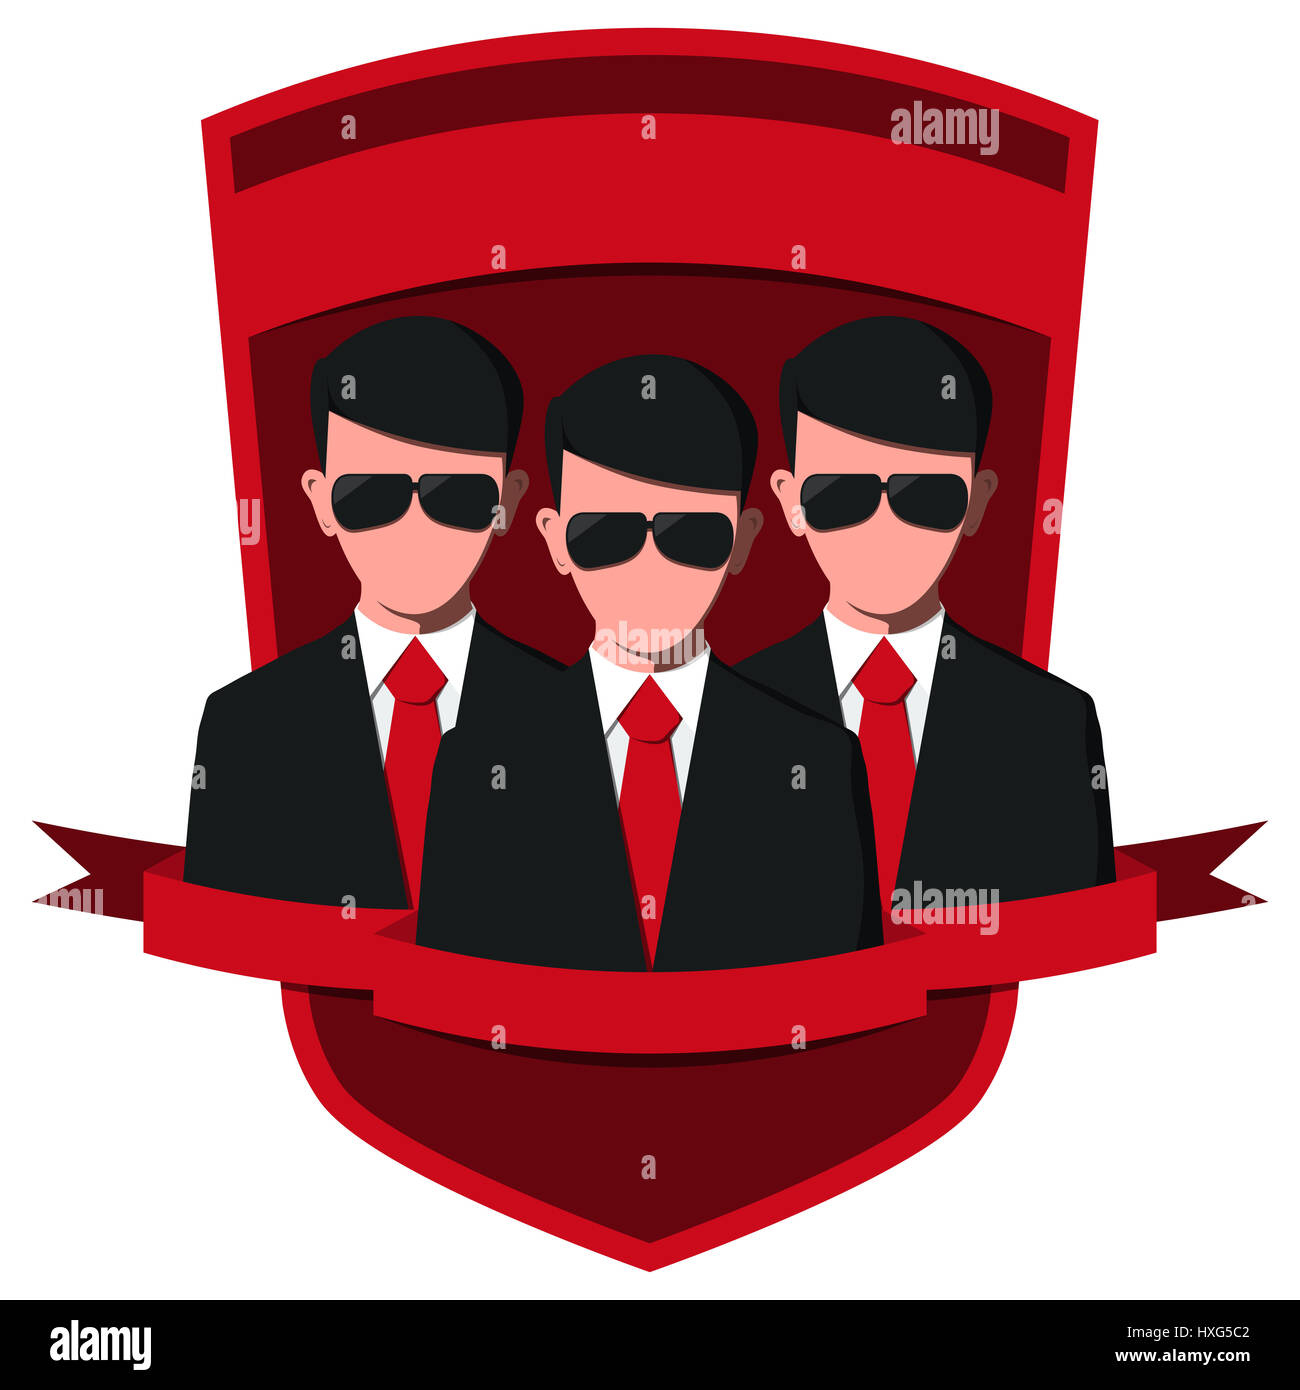 Emblem of security agency. Team of bodyguards on background of shield. Stock Photo